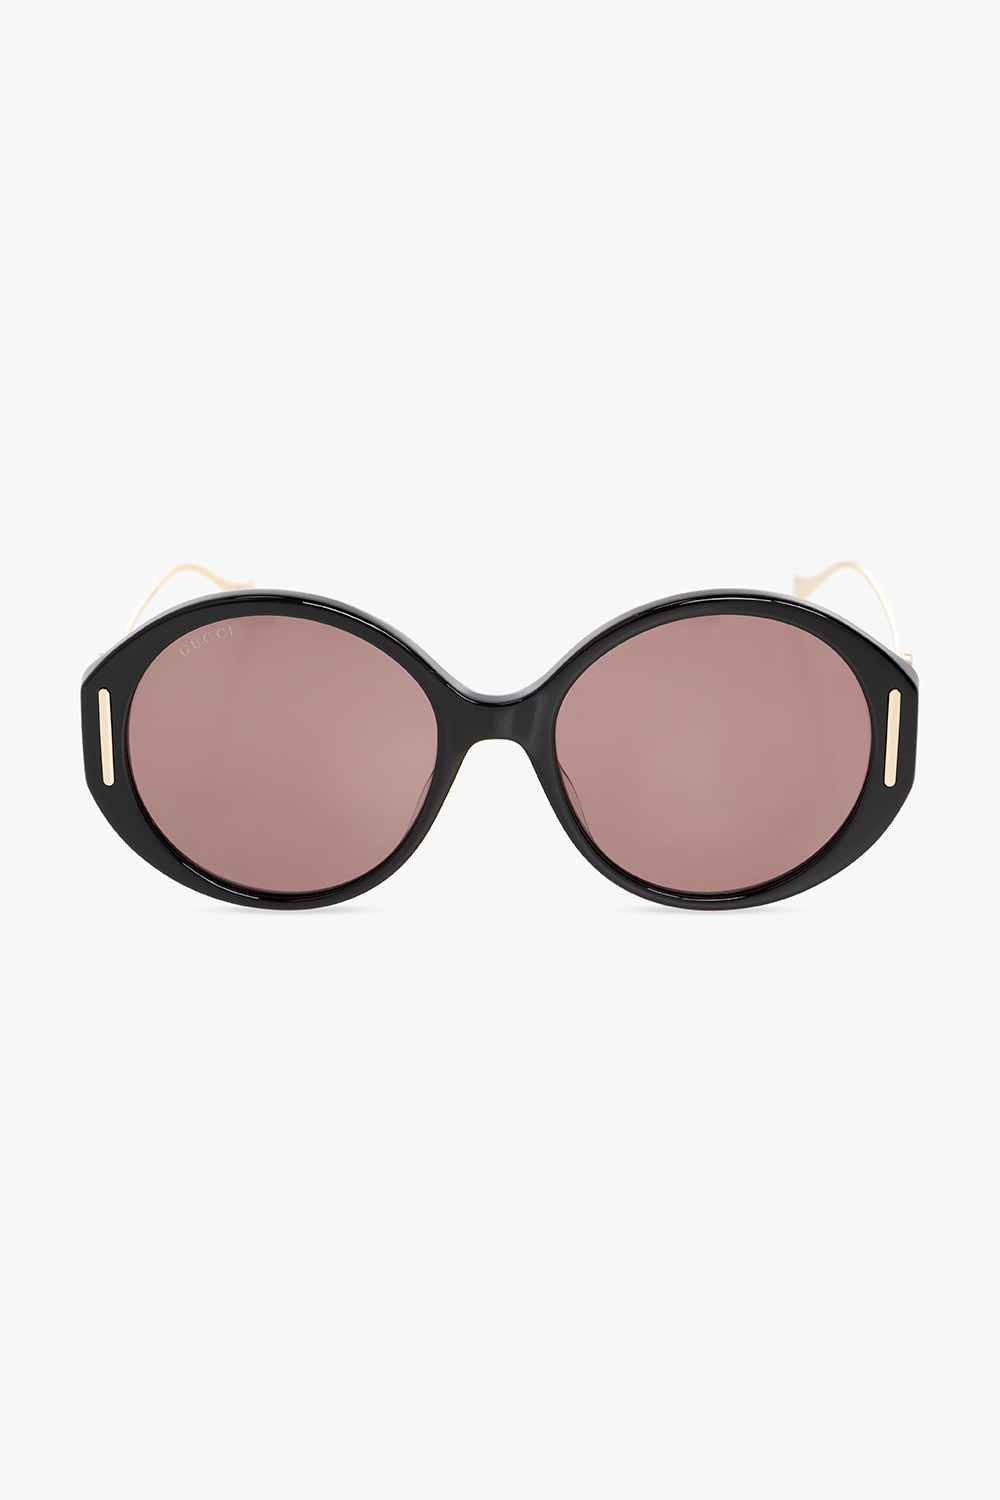 Gucci Burberry Eyewear tinted square-frame sunglasses